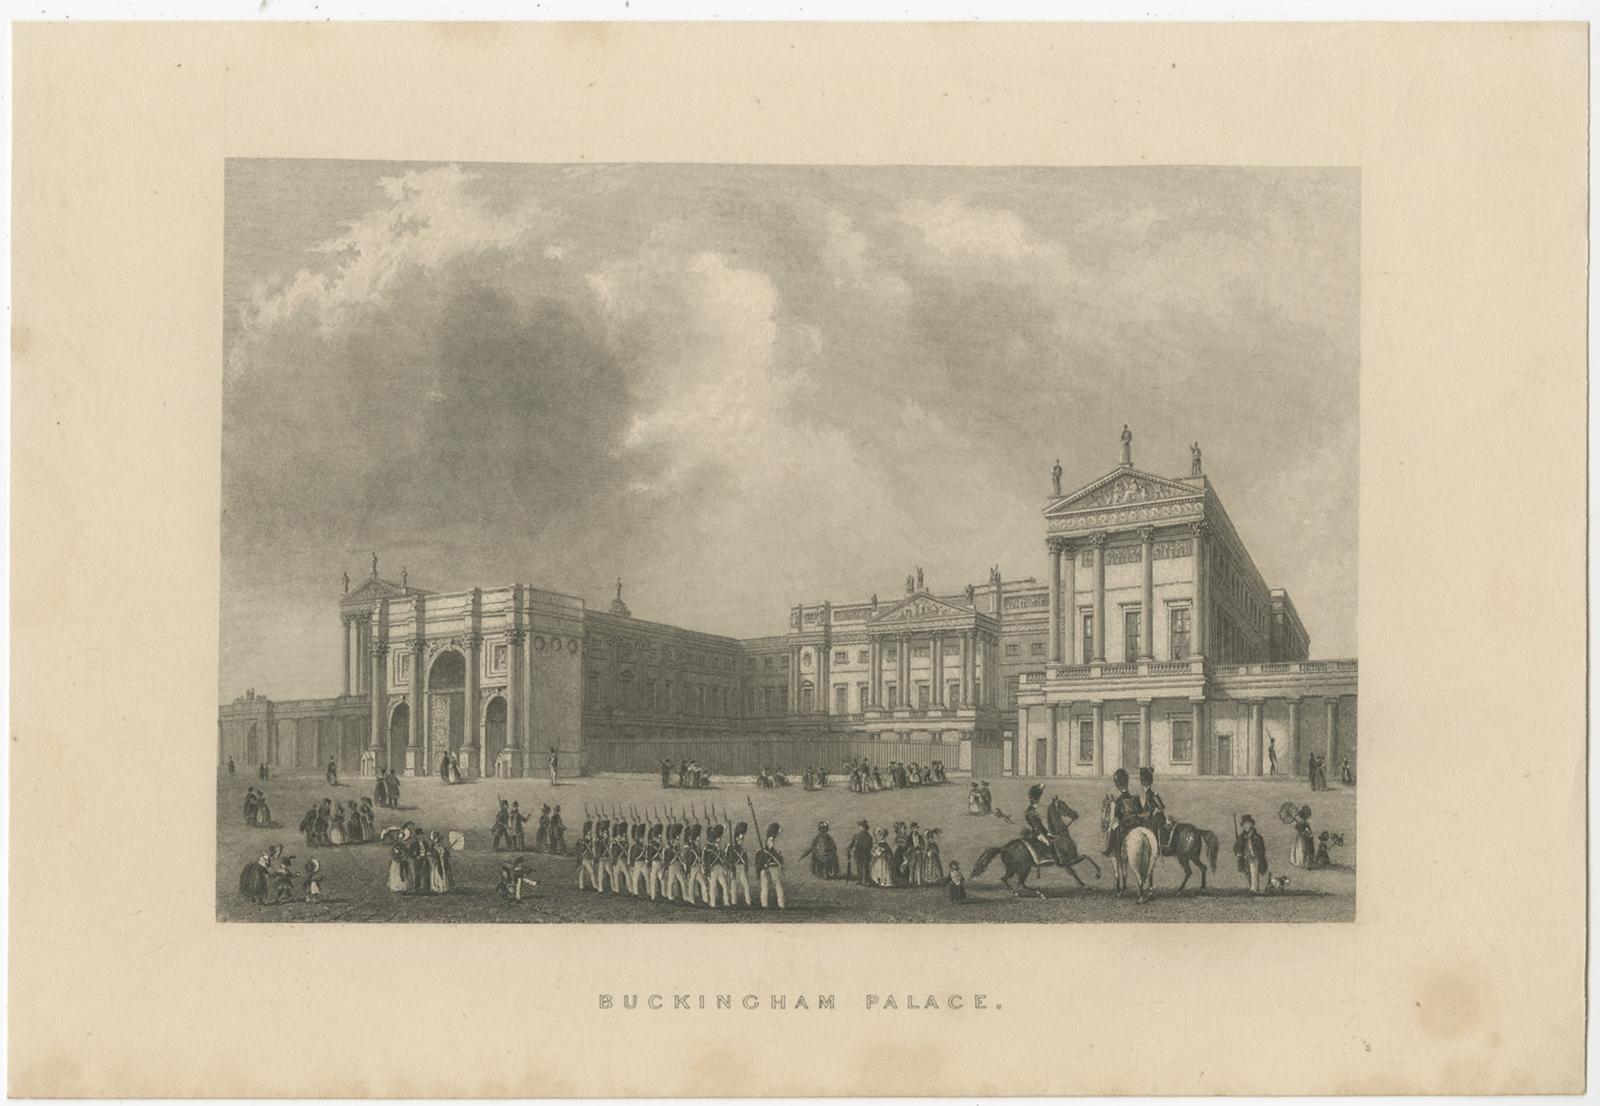 Description: Antique print titled 'Buckingham Palace'. 

Steel engraved view of Buckingham Palace. Source unknown, to be determined. 

Artists and Engravers: Anonymous.

Condition: Good, general age-related toning. Minor wear, blank verso.